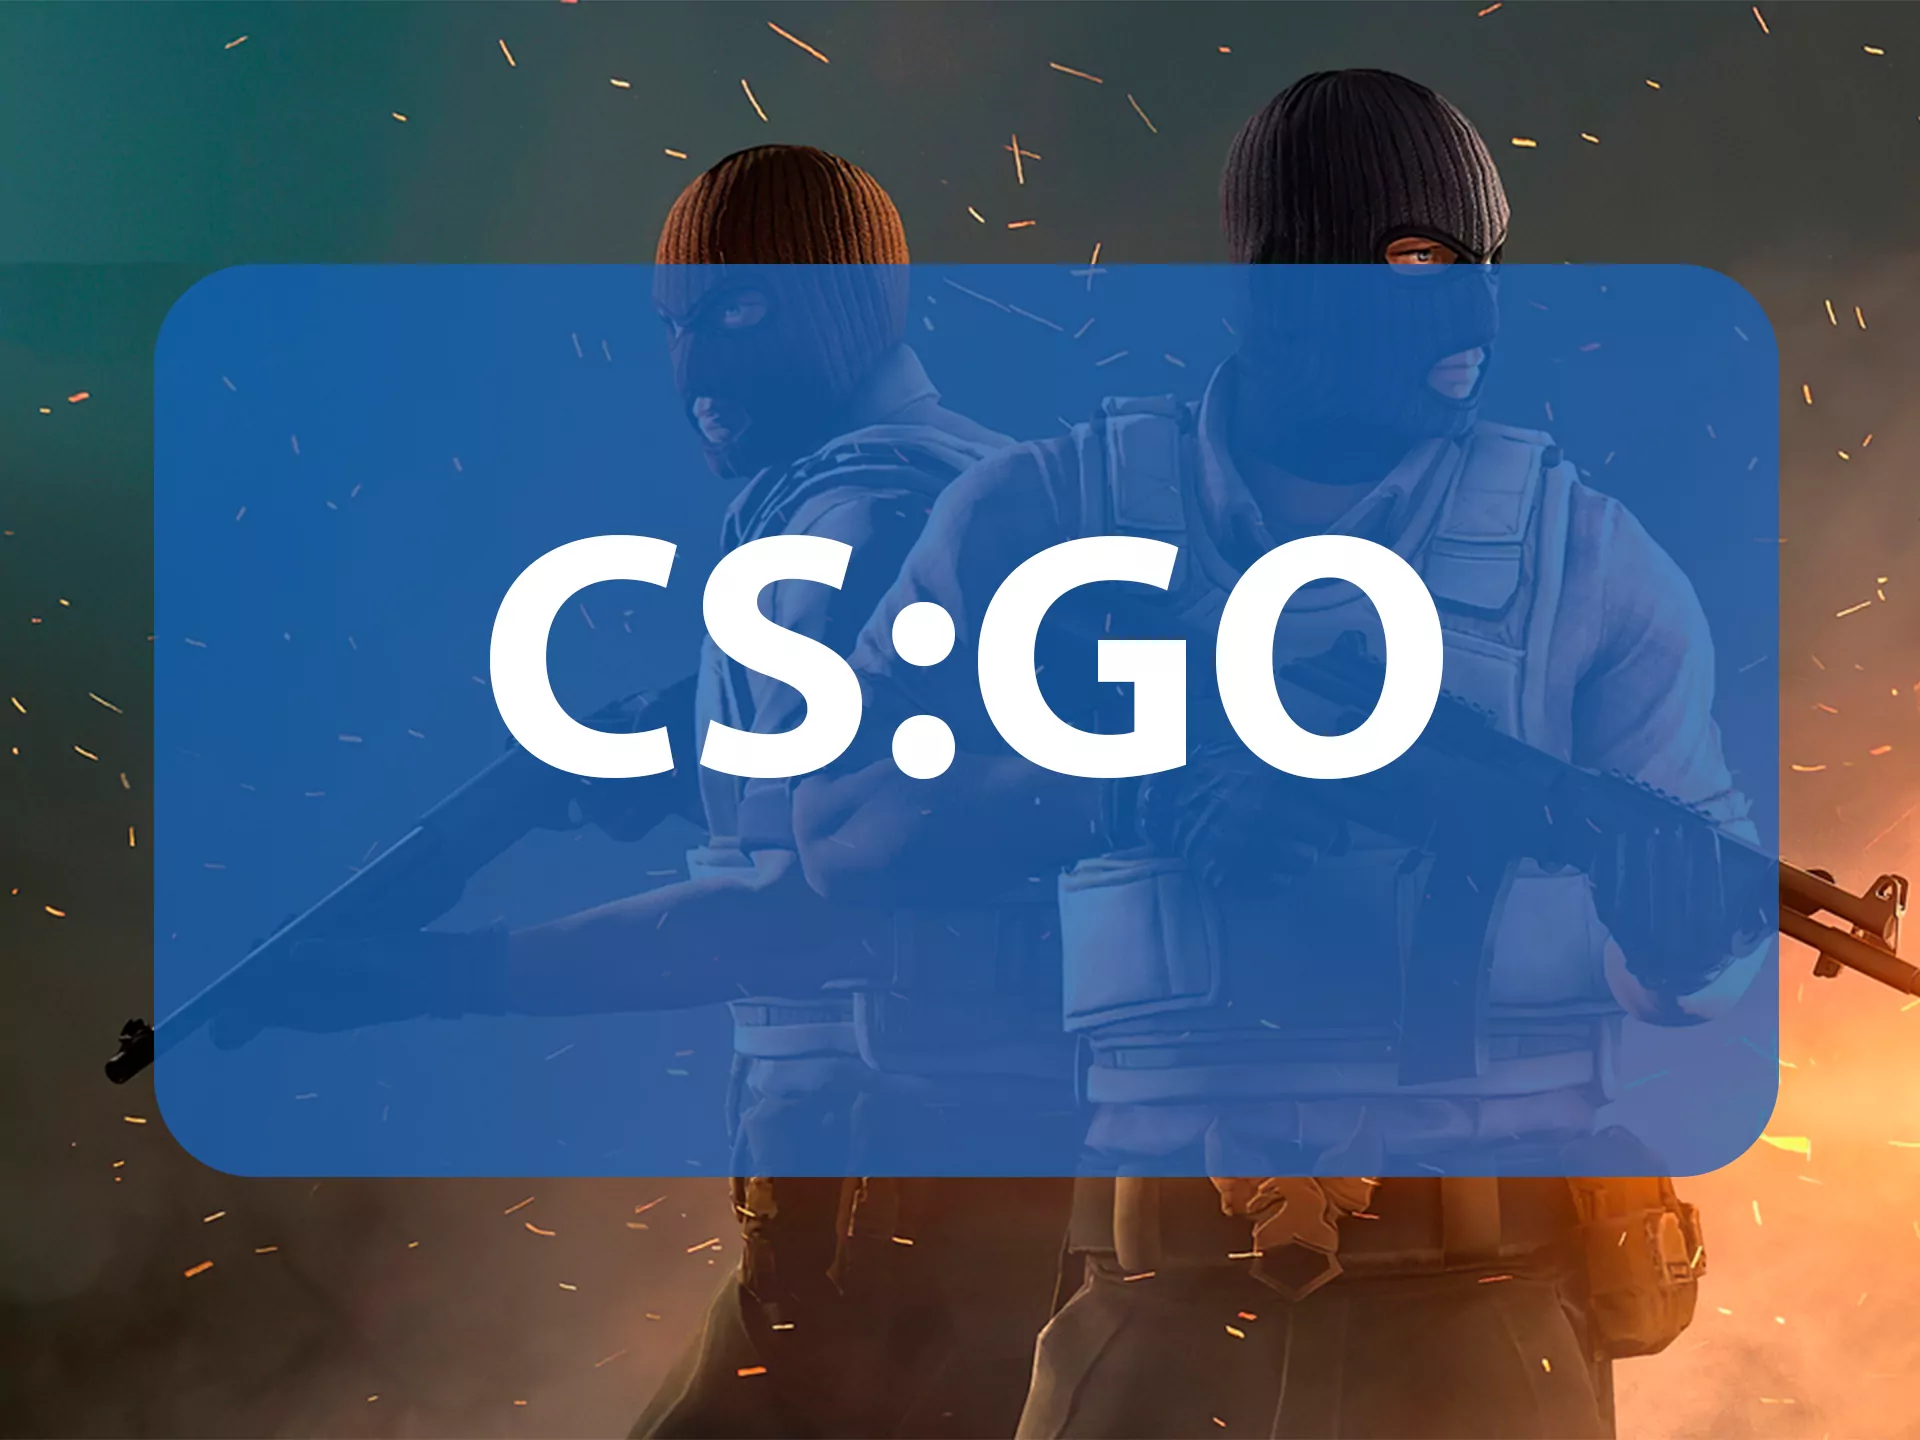 You can choose CS:GO for betting at Betcity.